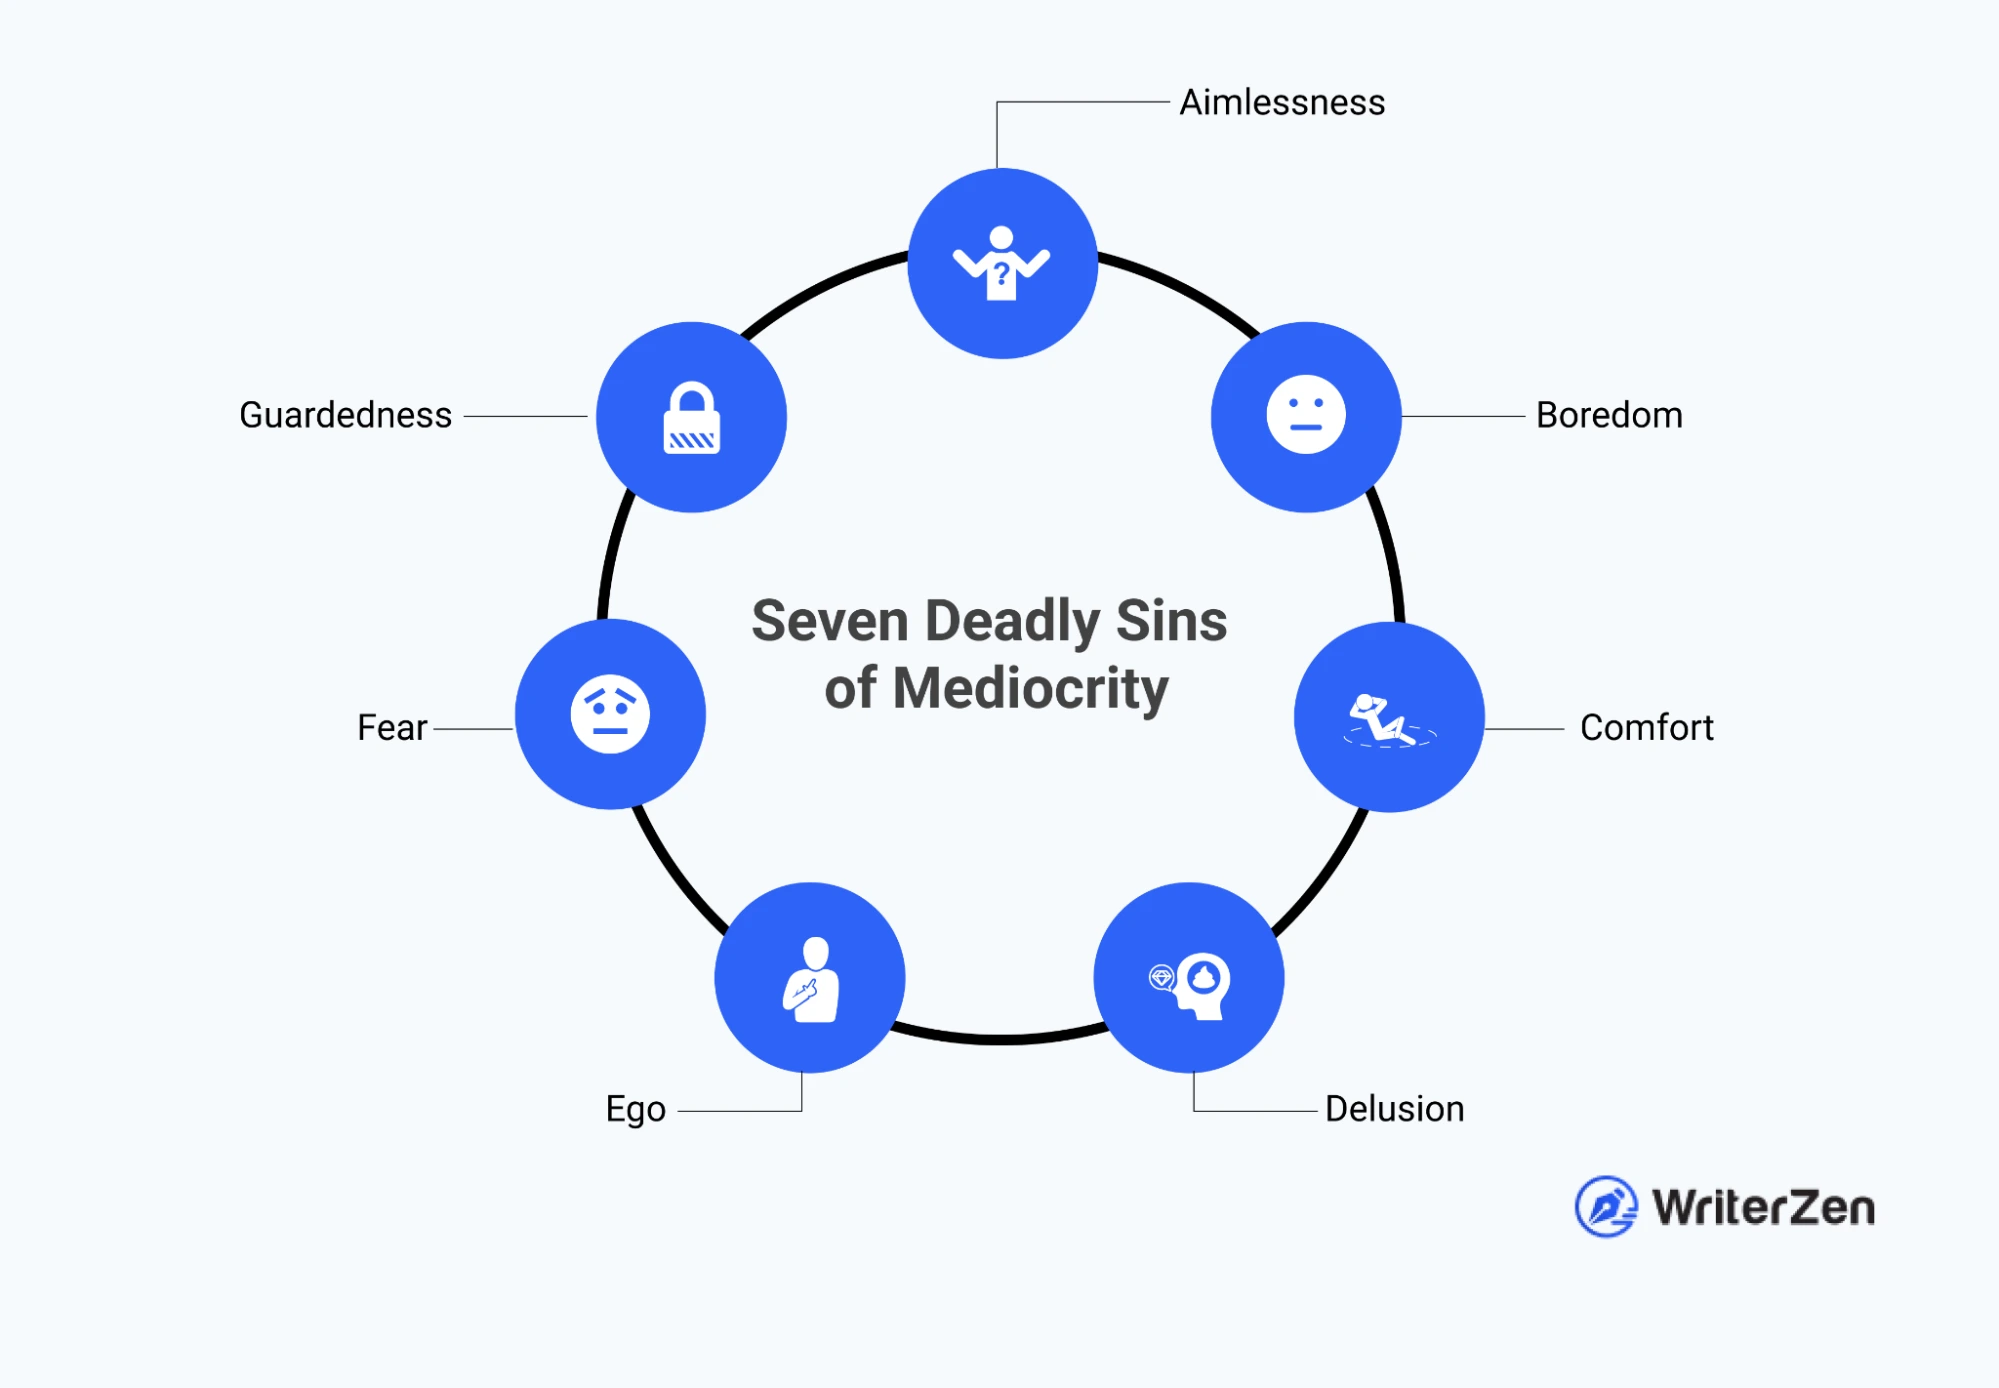 Seven Deadly Sins of Mediocrity